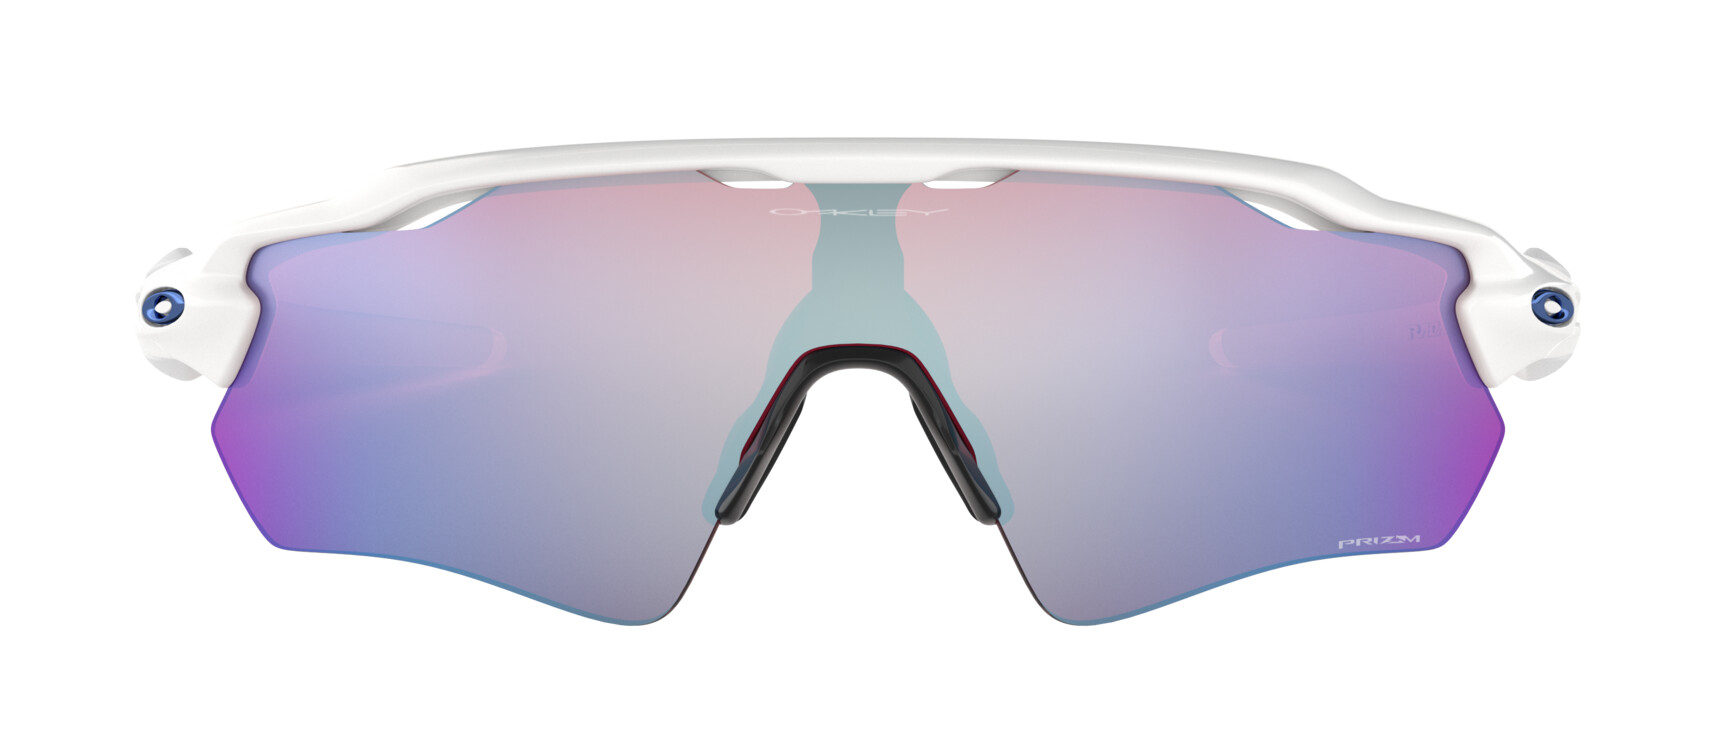 [products.image.front] Oakley RADAR EV PATH 0OO9208 920847 Sonnenbrille